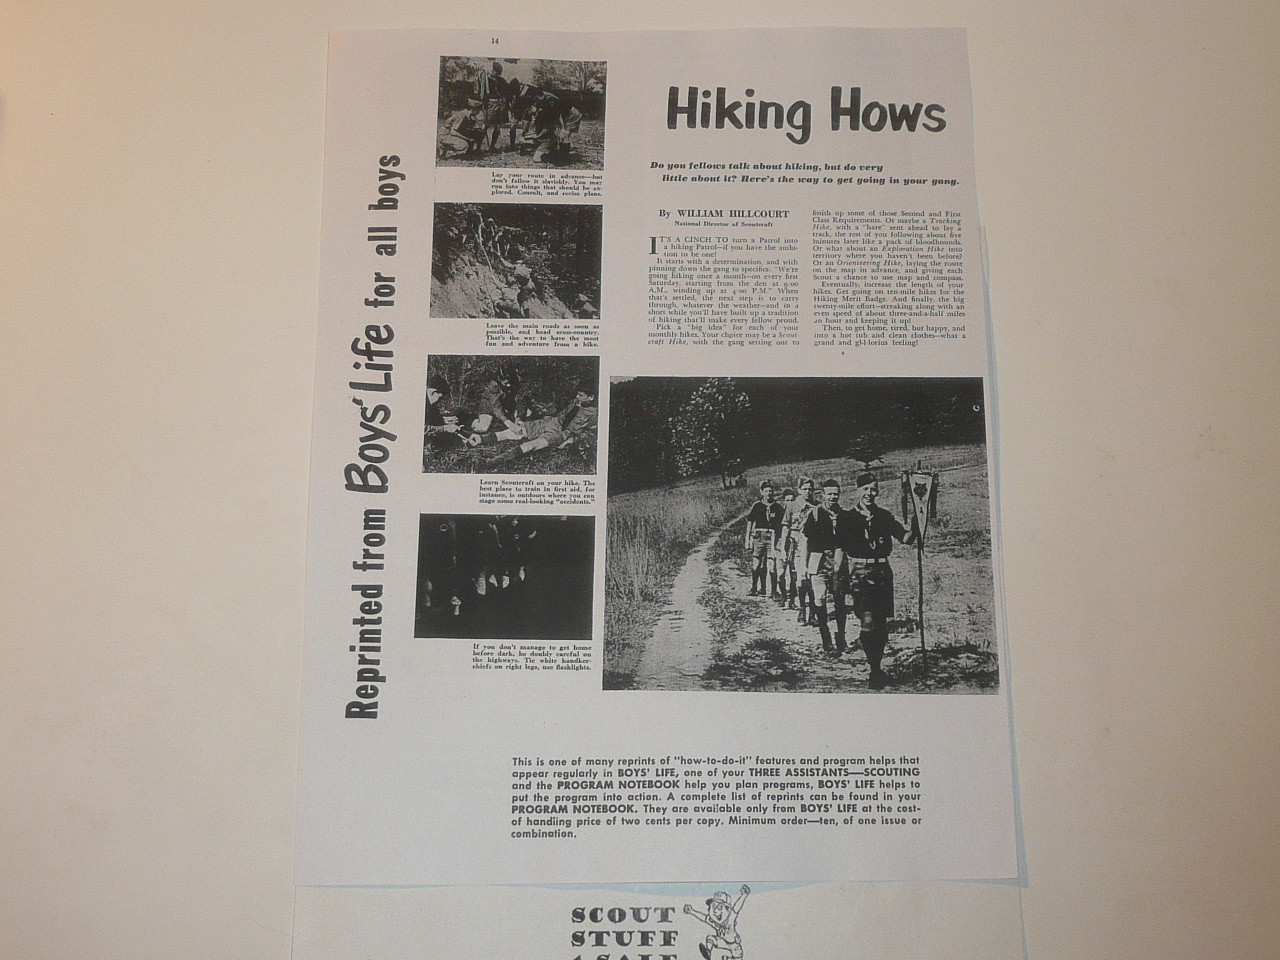 Hiking Hows, By Green Bar Bill, Boys' Life Single Topic Reprint from the 1950's - 1960's , written for Scouts, great teaching materials